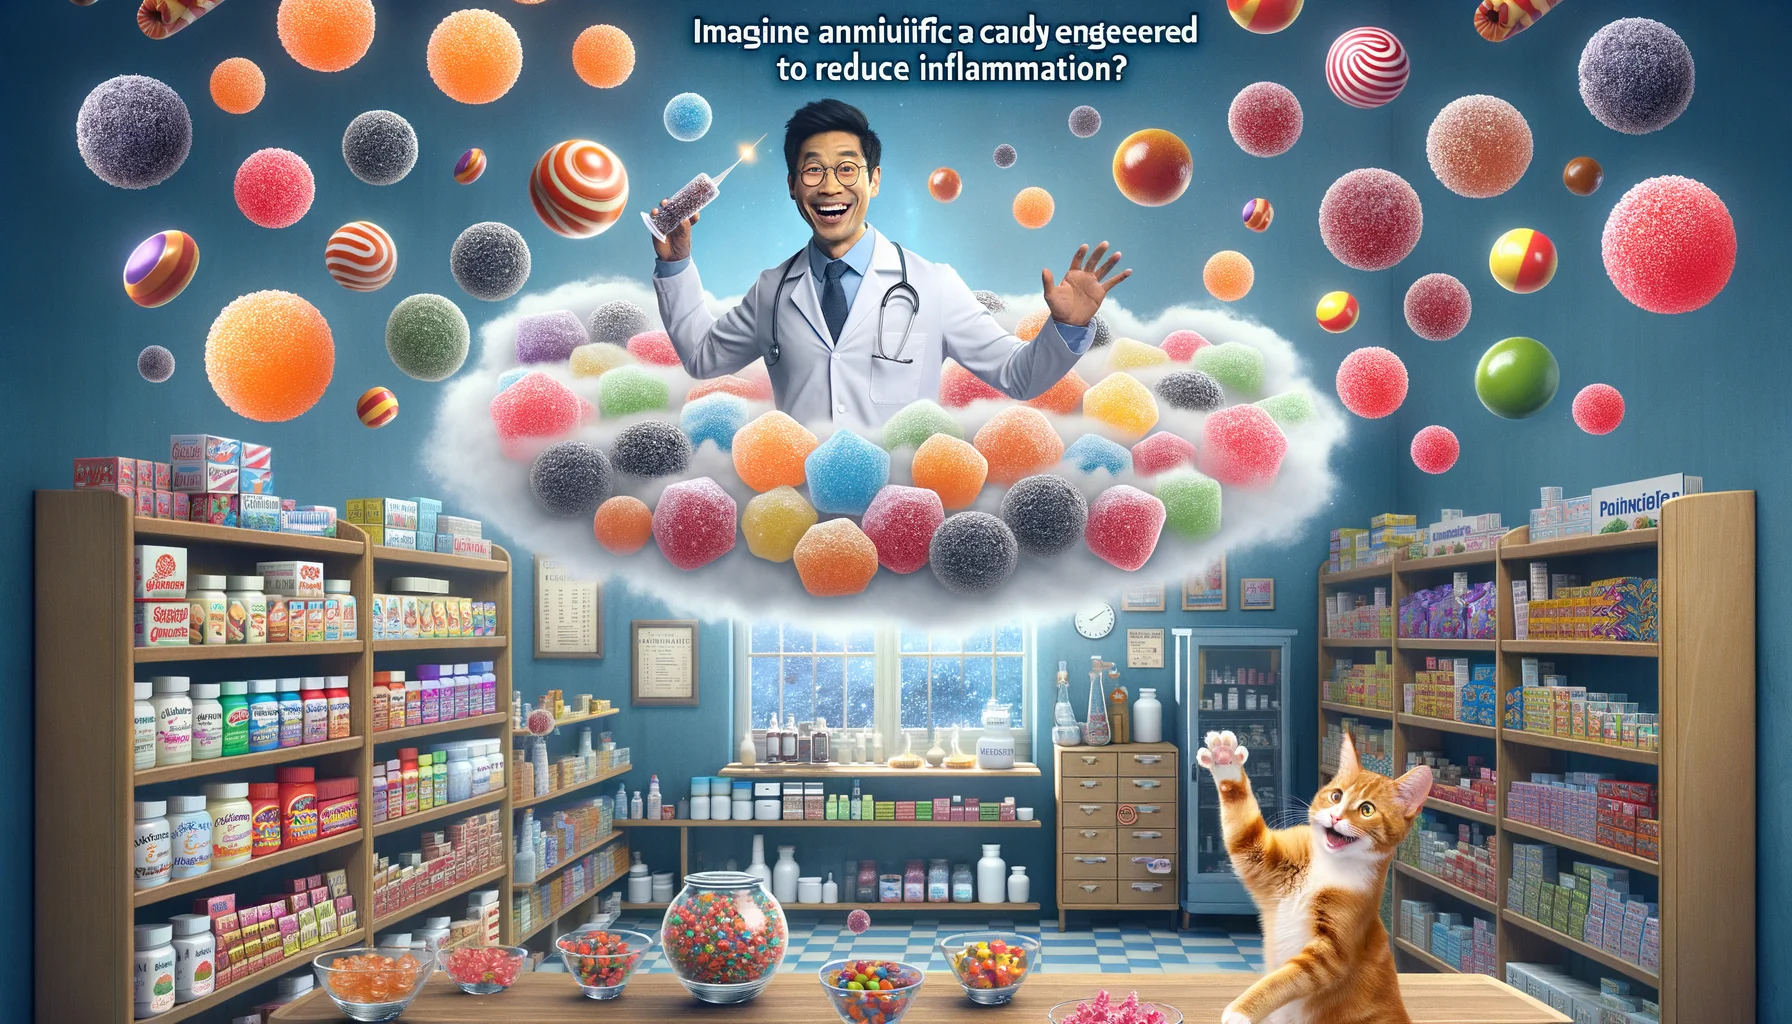 Imagine an amusing yet realistic situation displaying various candies engineered to reduce inflammation. Picture this perfect scenario: a cheerful South Asian man, a sophisticated pharmacist, floats in a candy cloud above his pharmacy. The cloud carries an assortment of colorful, delicious-looking candies all labeled with their anti-inflammatory properties. Add a touch of whimsy by having a goofy cute ginger cat attempting to jump up from the countertop to snatch a candy. The whole scenario is radiating happiness and health, creating a positive vibe about the effectiveness of these inflammation-reducing candies.